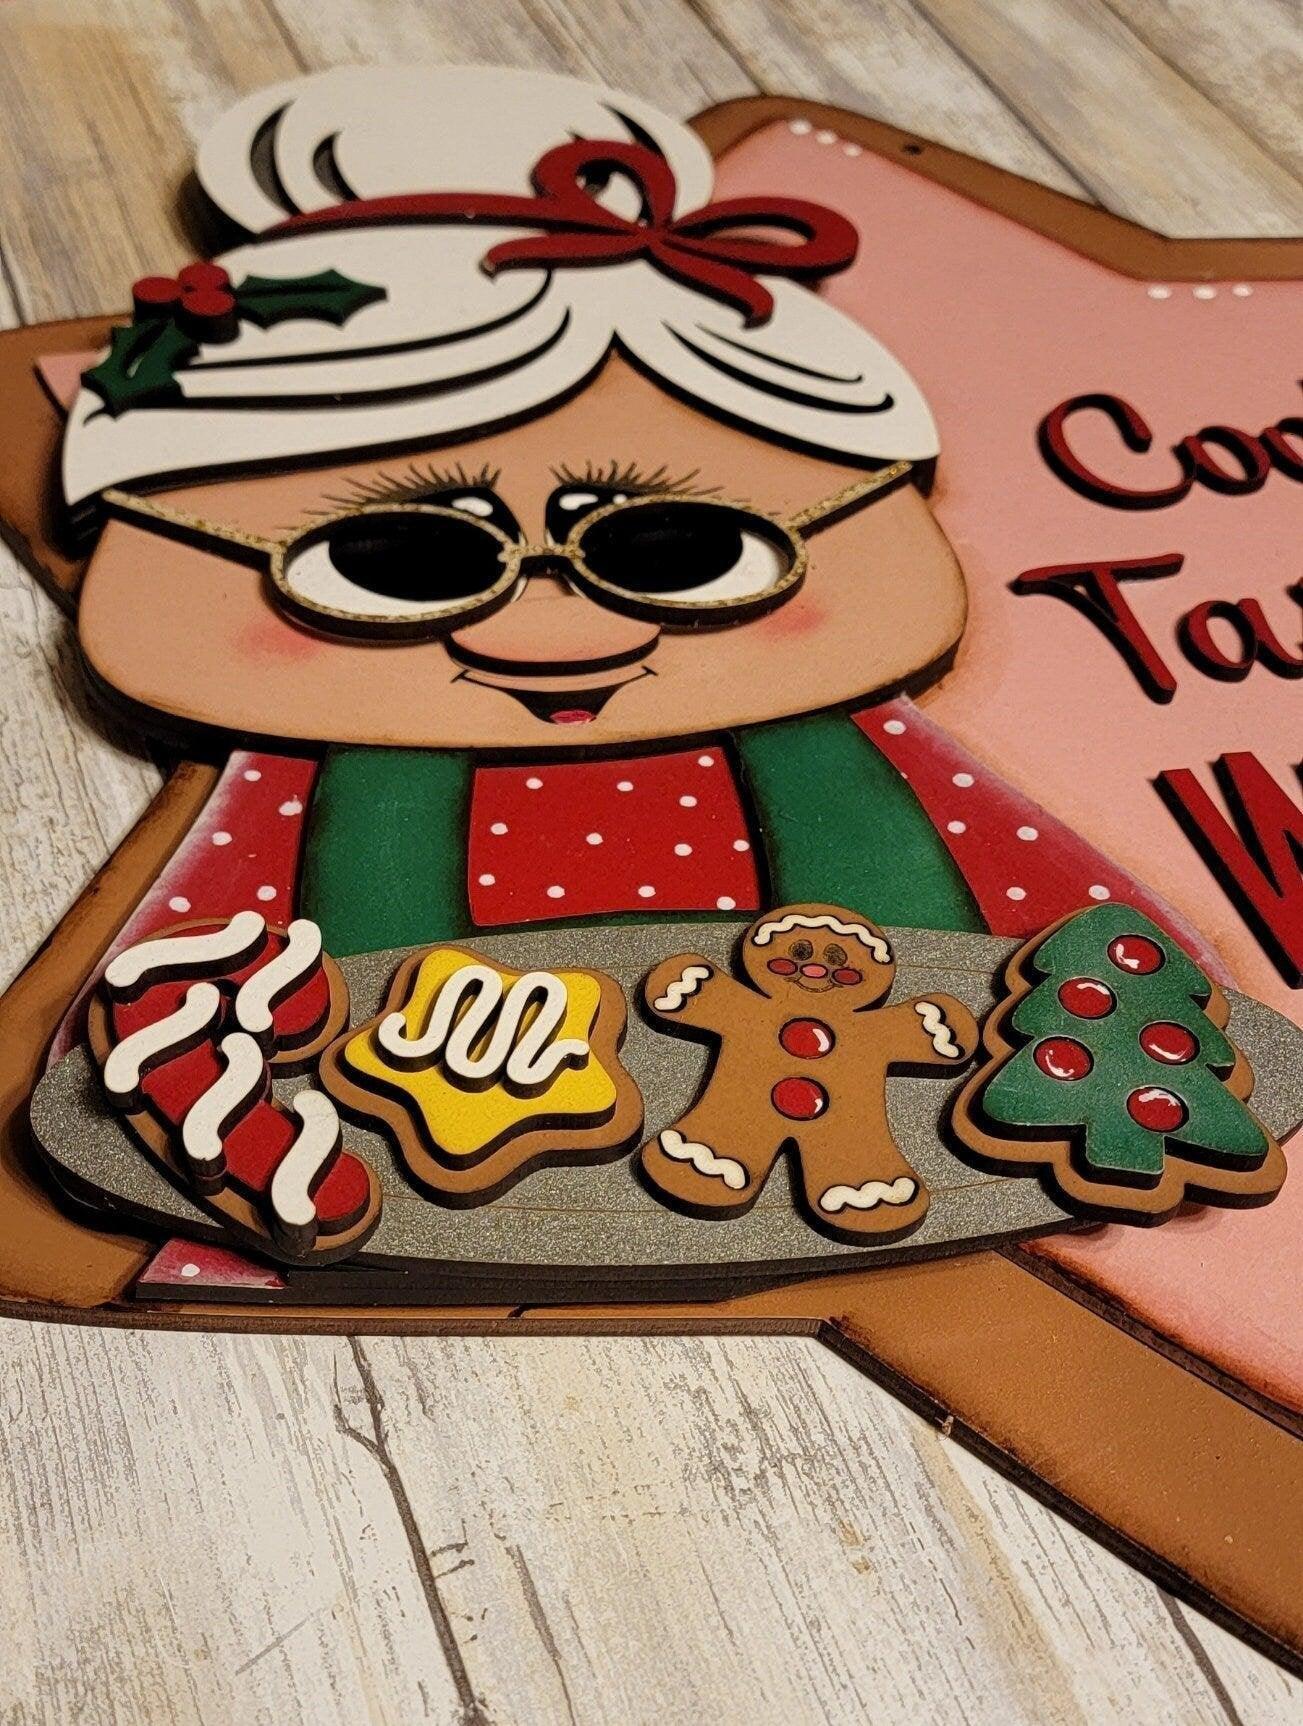 Mrs Claus Cookie Tasters Welcome Christmas Front Door Hanger SVG Cut File - RusticFarmhouseDecor